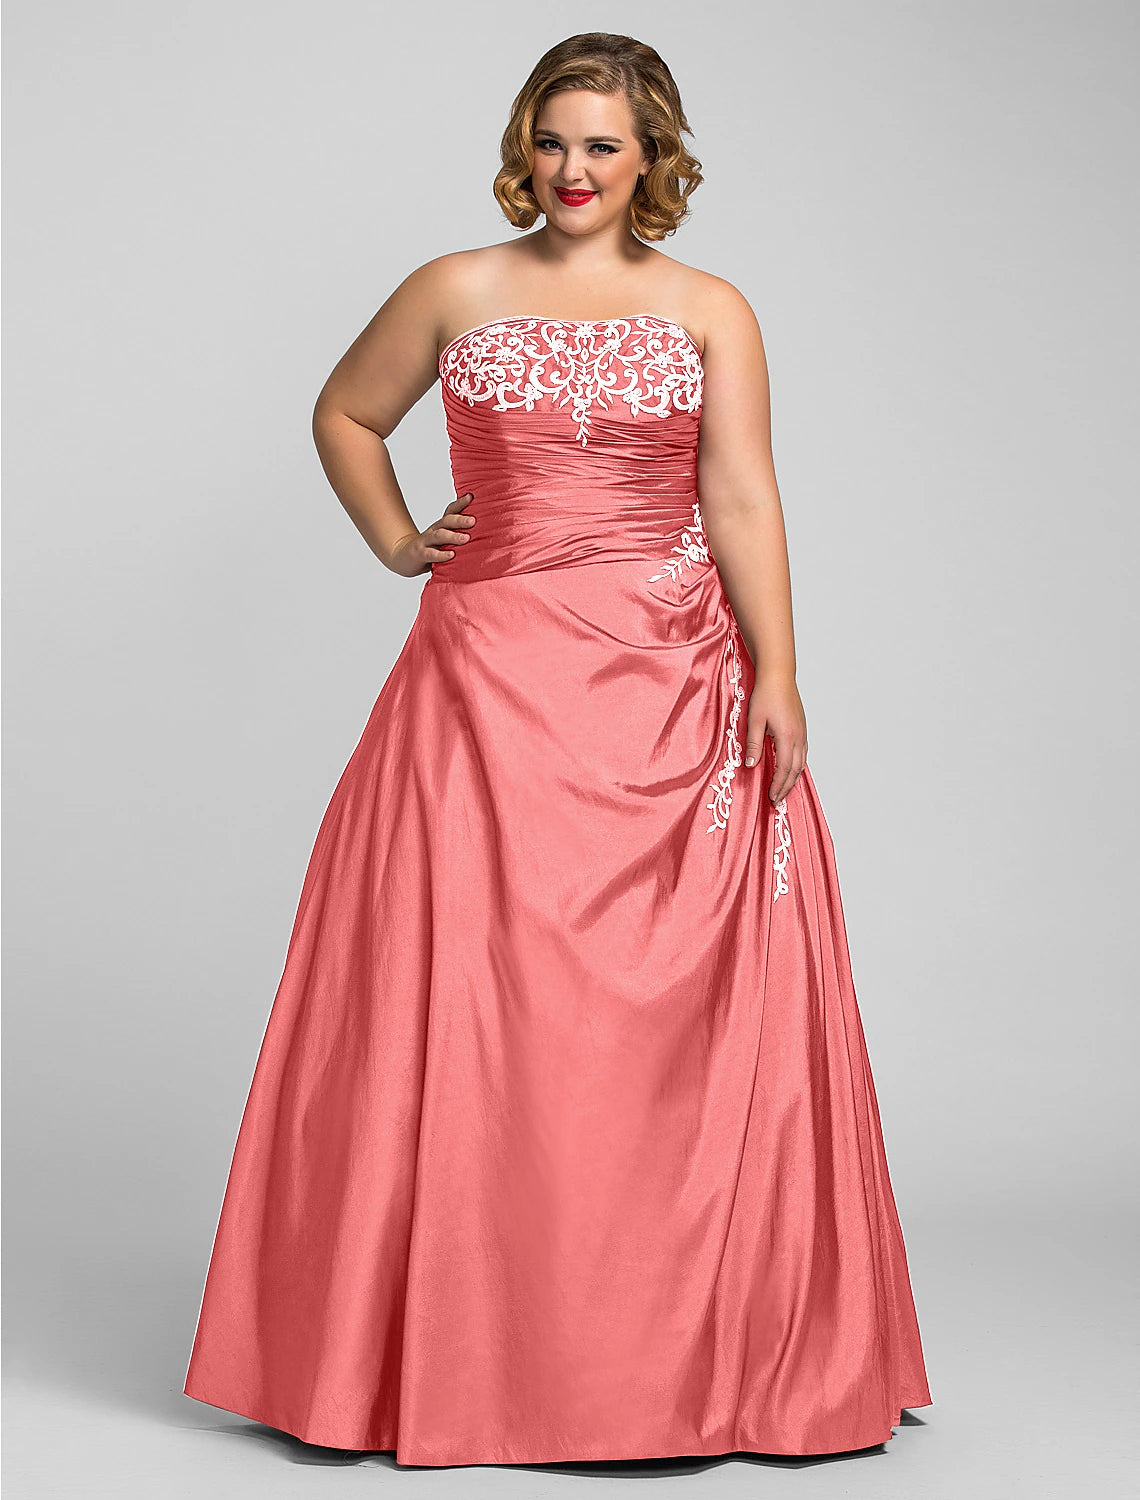 Wholesa Ball Gown Plus Size Prom Formal Evening Dress Strapless Sleeveless Floor Length Taffeta with Beading Appliques